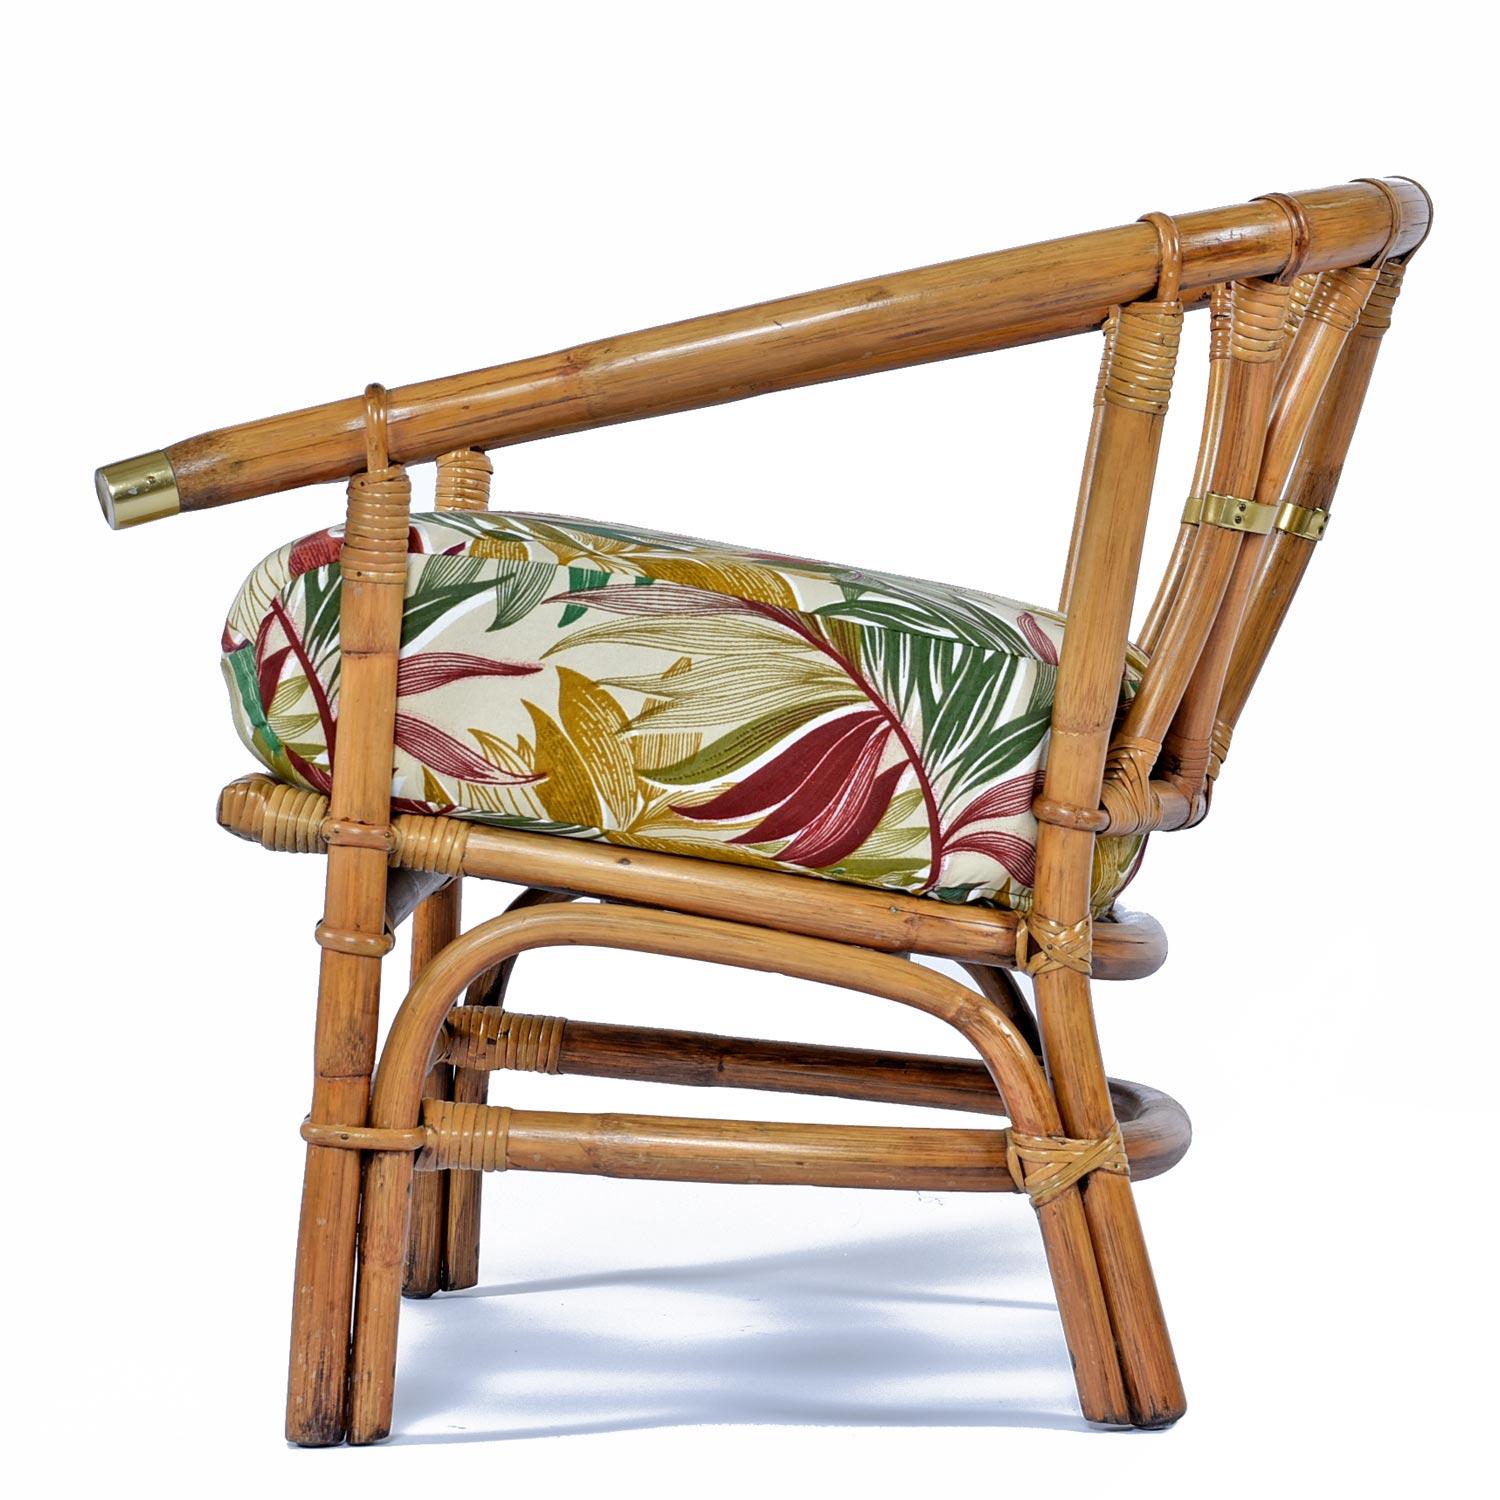 Inspired by the tropical lands of the the East, this bamboo armchair features stylish campaign style brass caps that punctuate the pagoda style arms. Intricately woven wheat colored bamboo twists and turns to comprise the scaffold of this chair. The